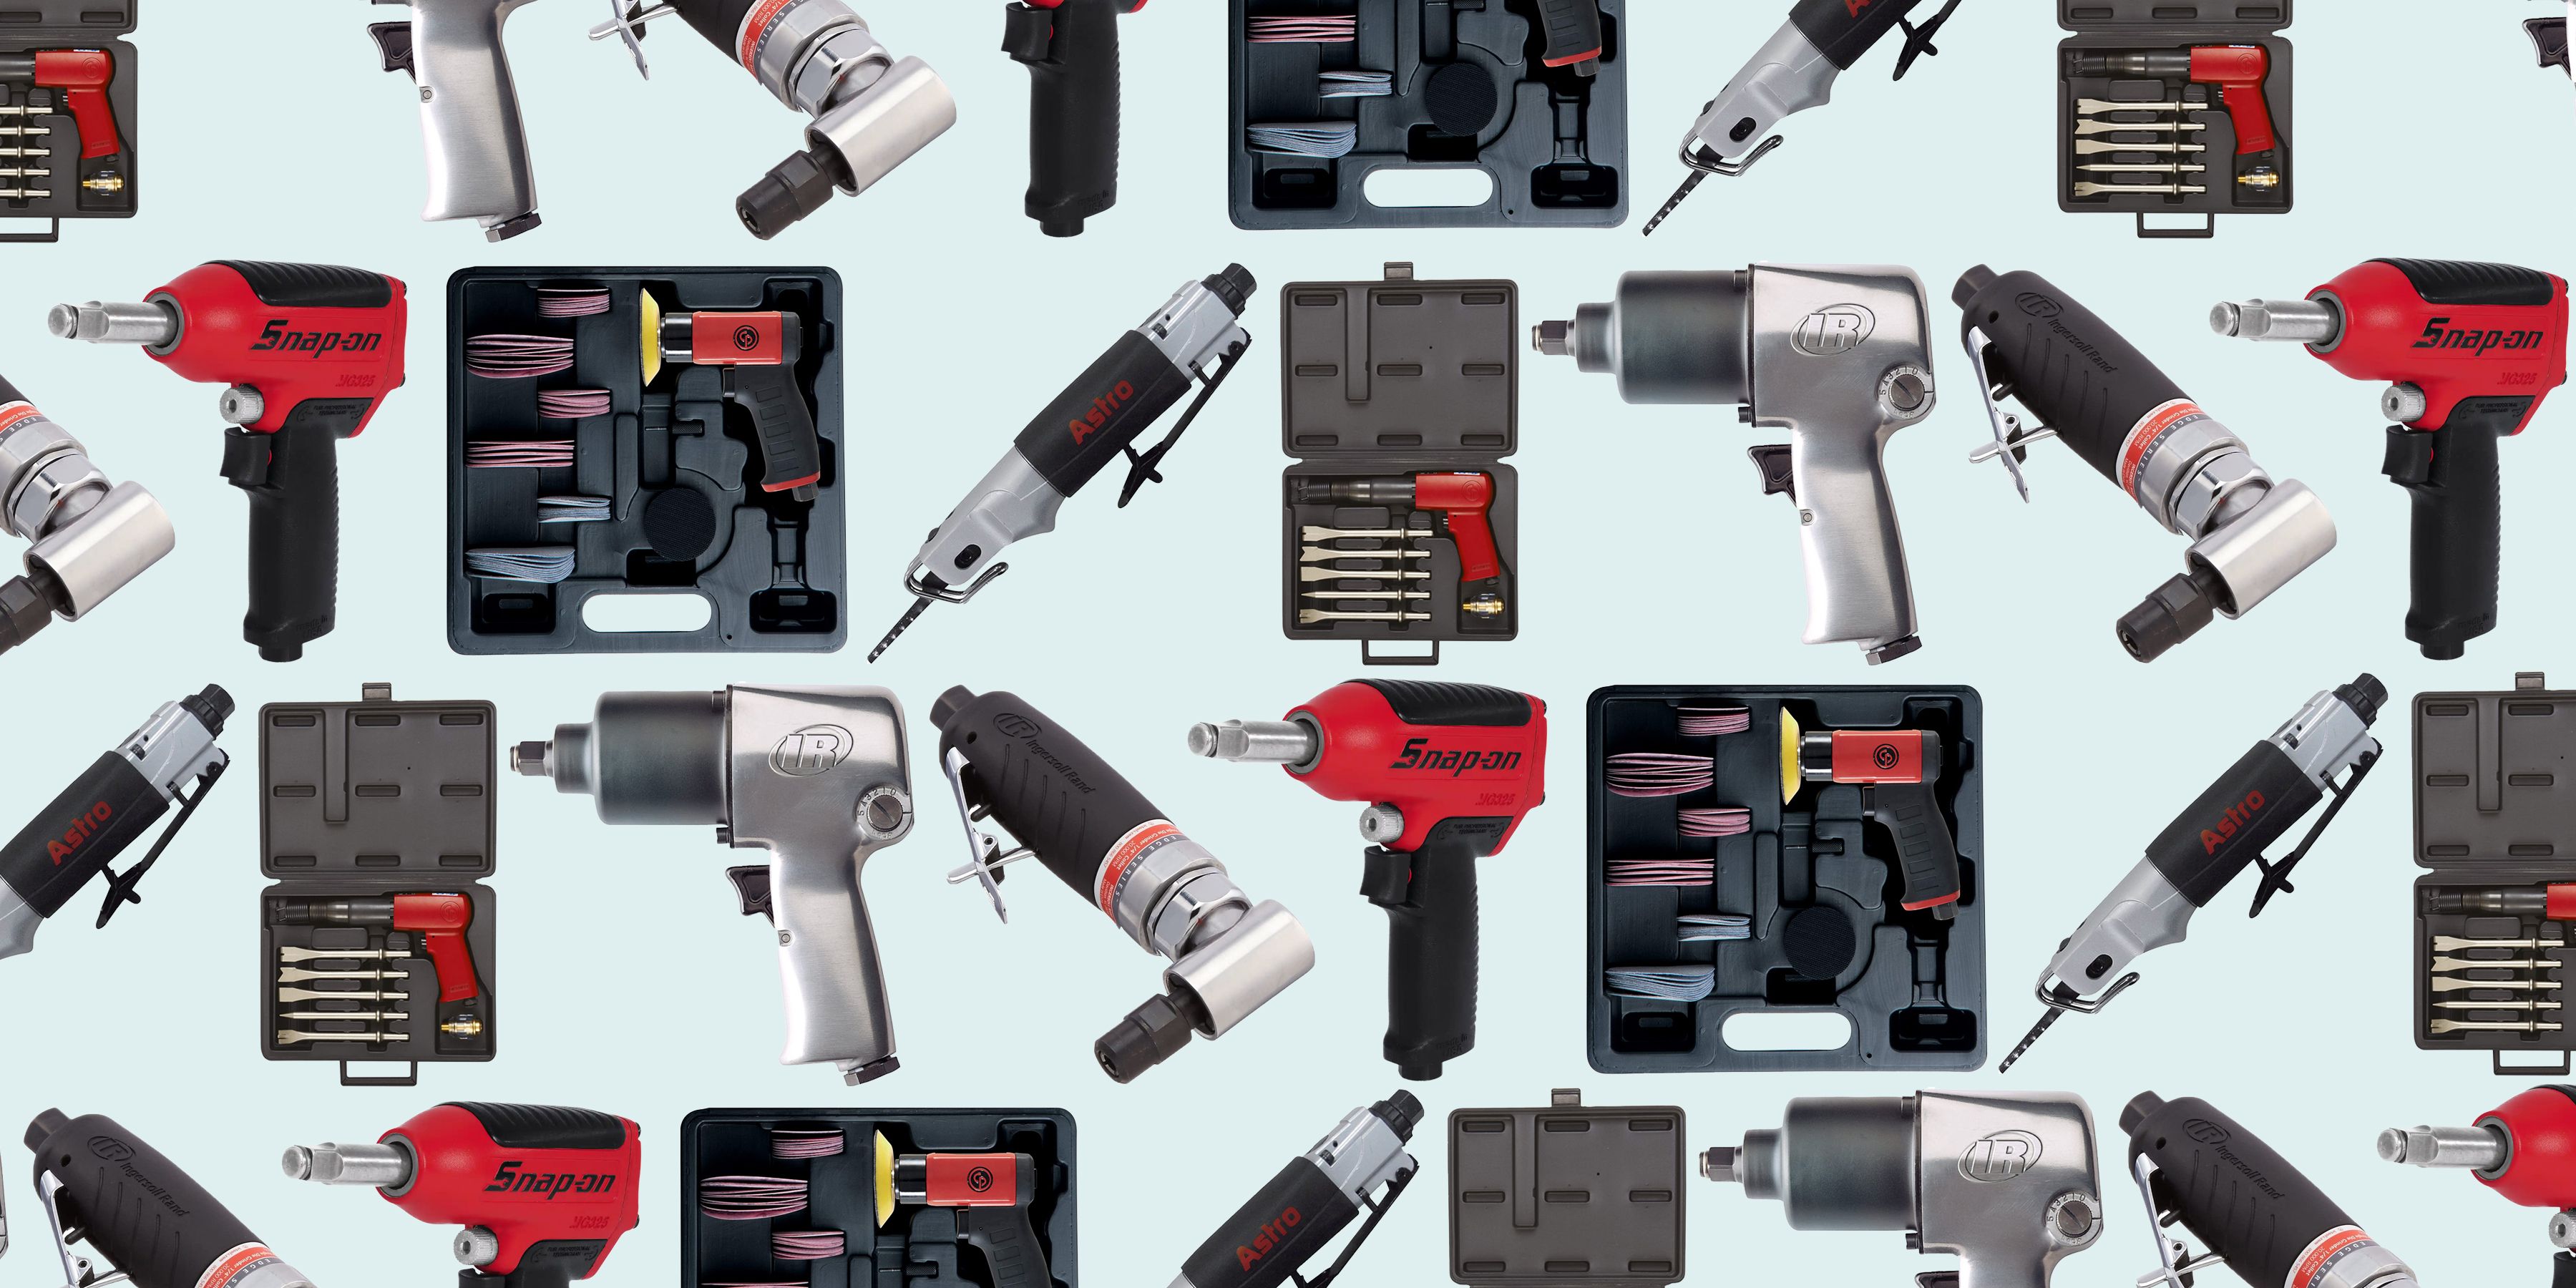 12 Air Tools Recommended by the Pros